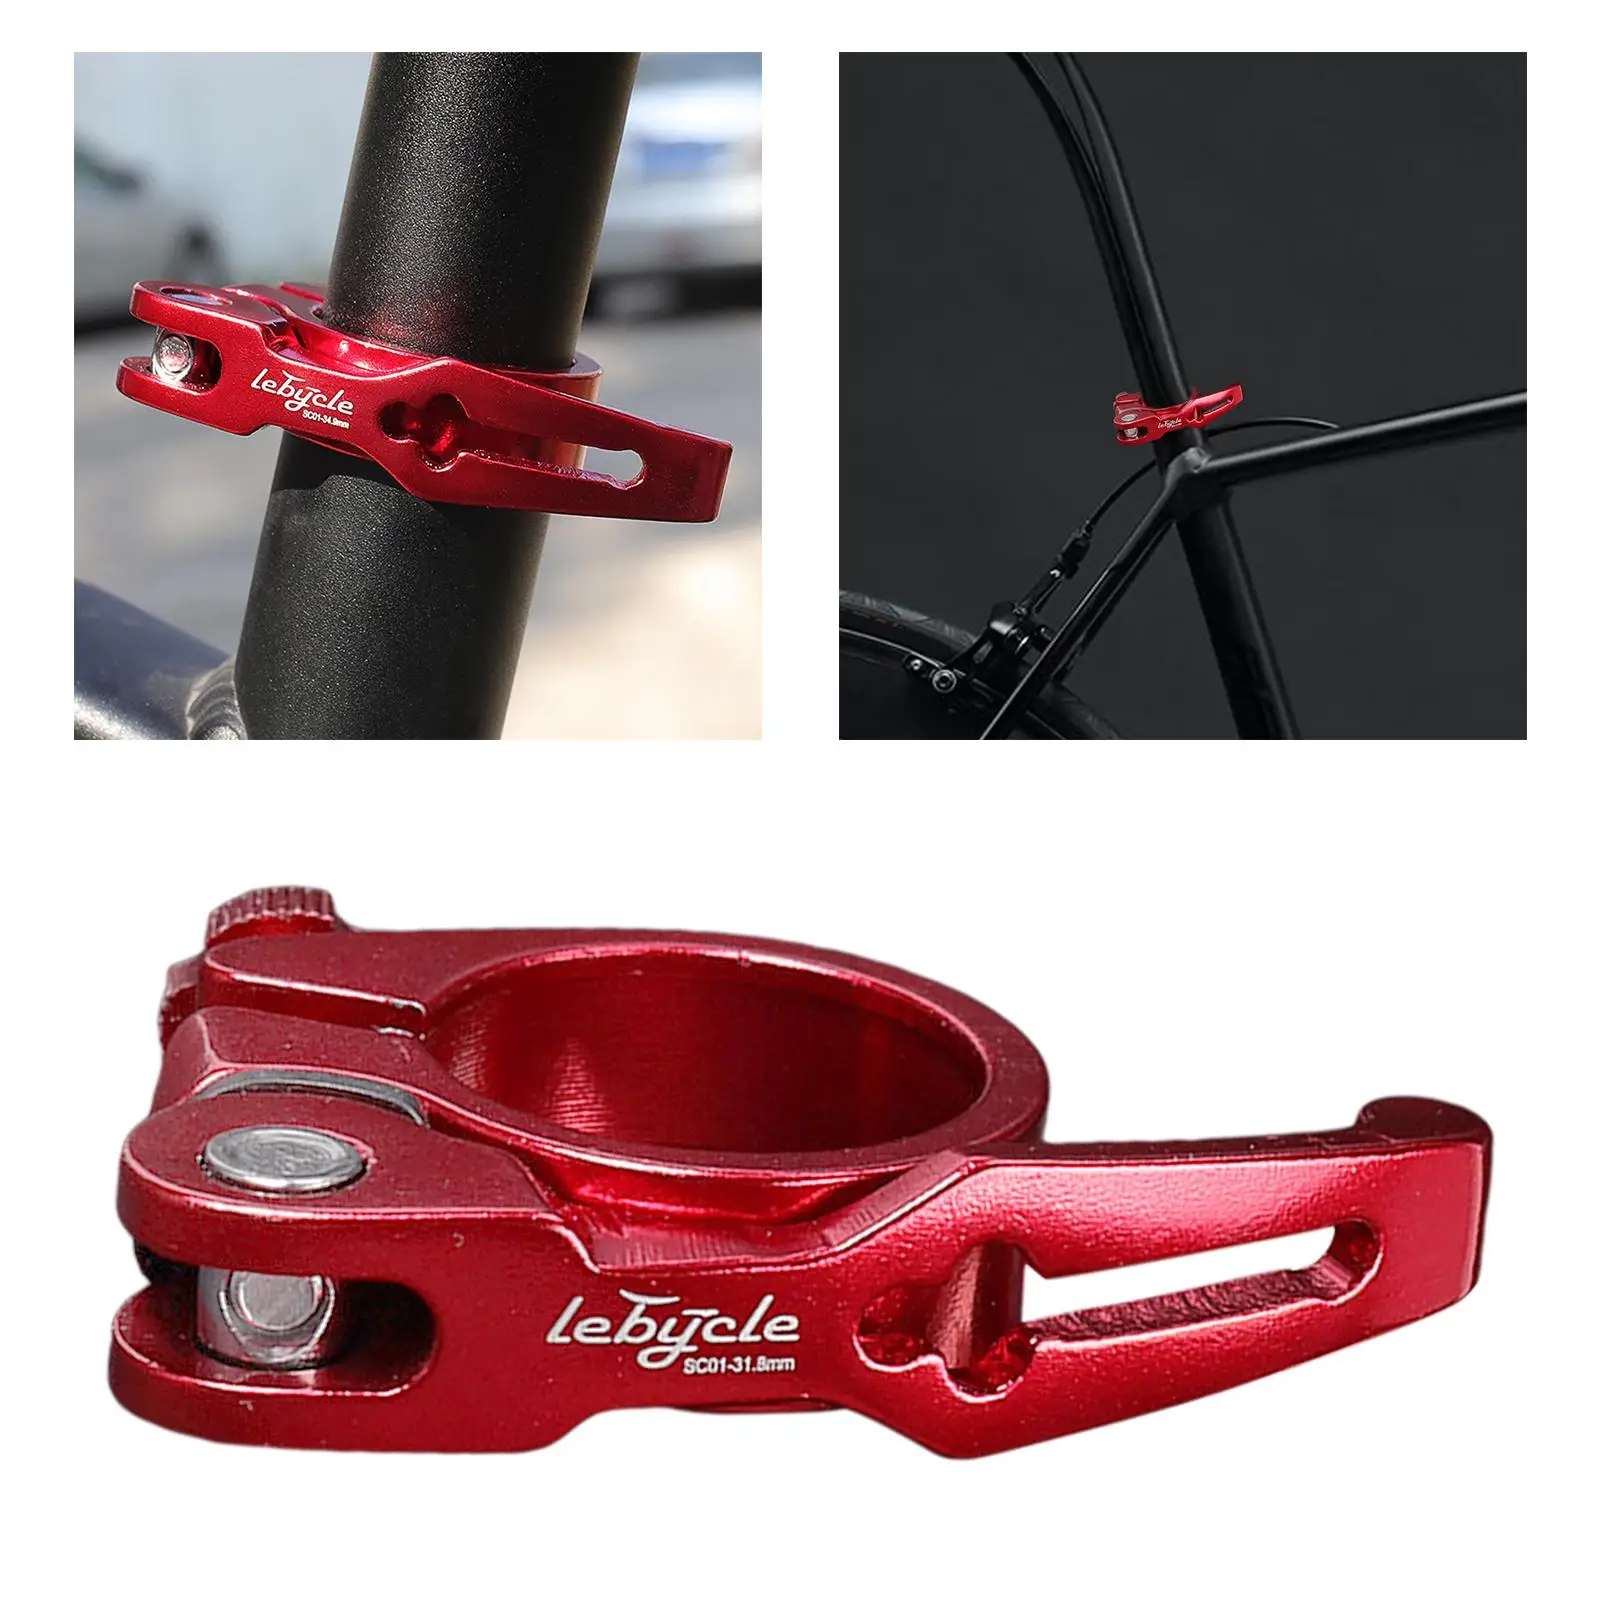 Alloy Bike Seatpost Clamp Bicycle Cycling Tube Seat Post Clip Equipment